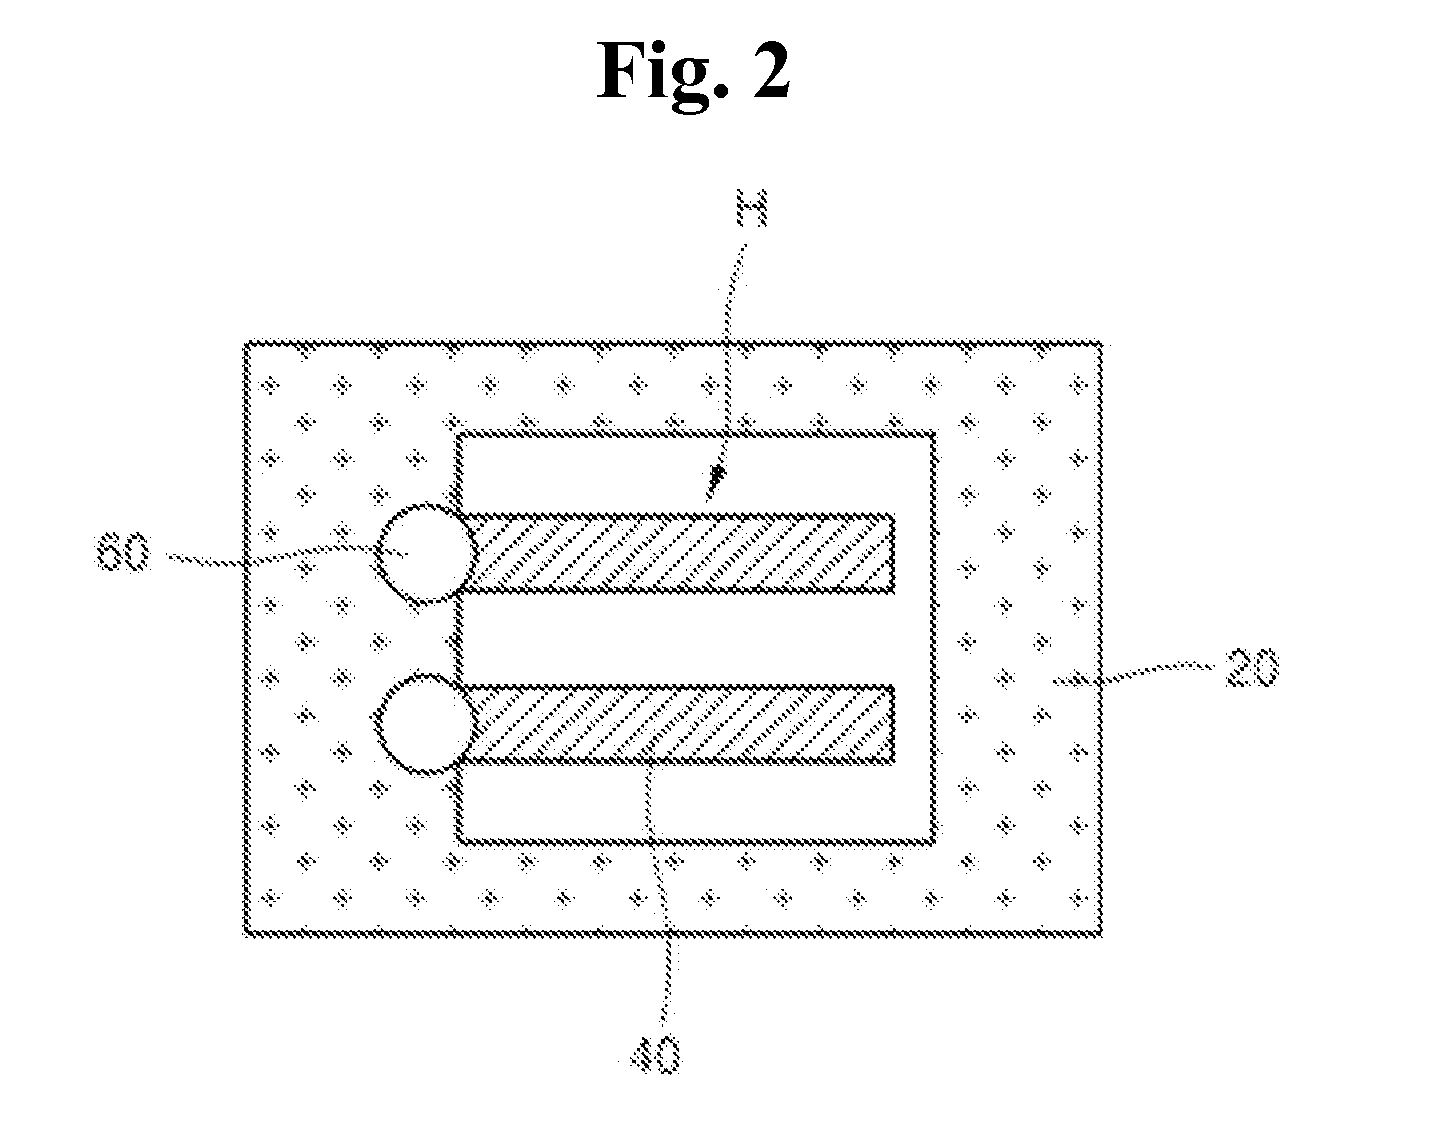 Battery assembly using printed circuit board substrate including bus bar